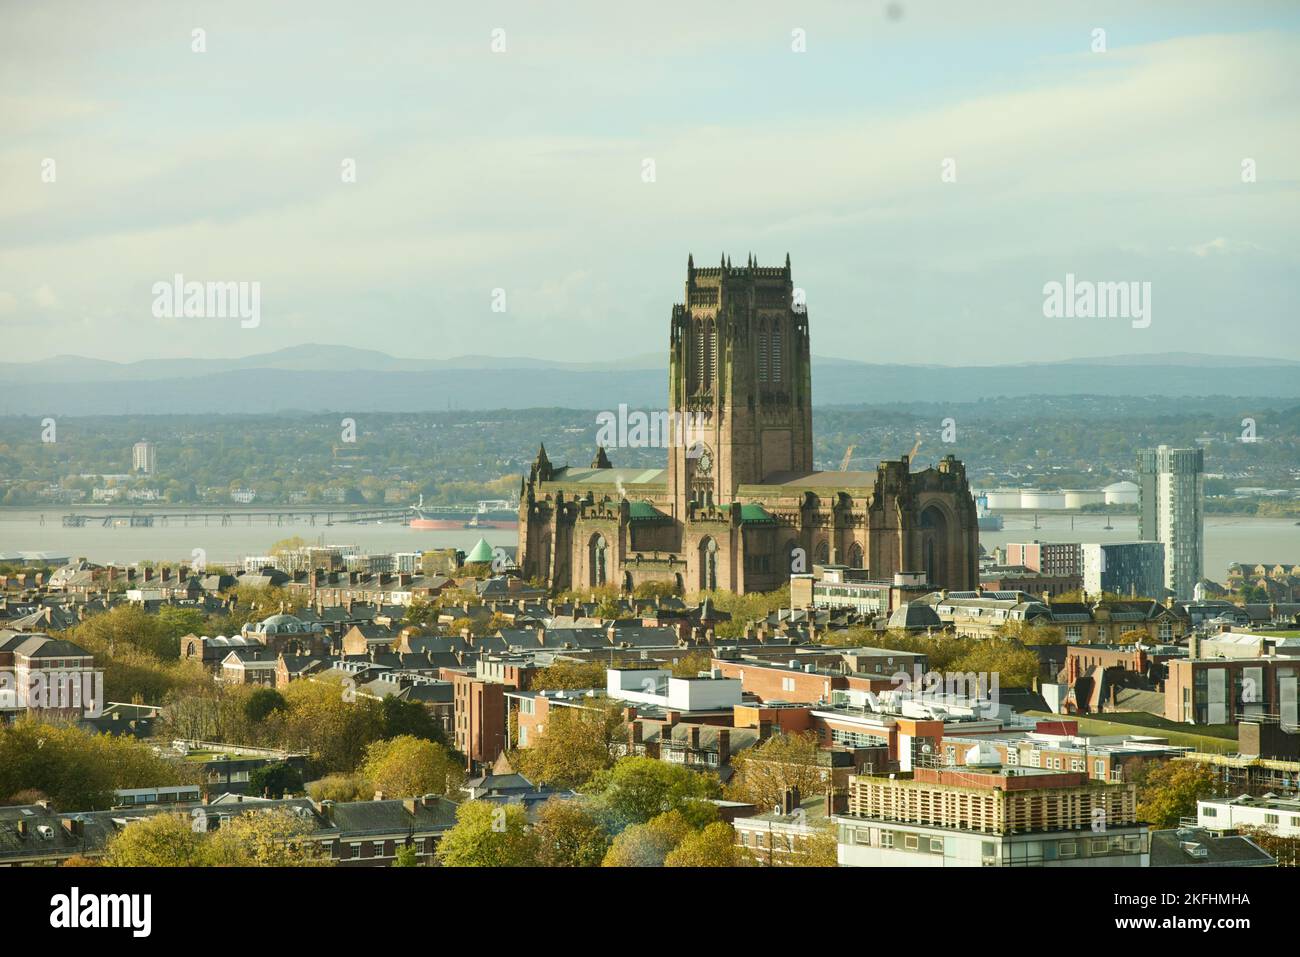 Iverpool Cathedral Anglikanische Diözese Liverpool, erbaut auf dem St. James's Mount in Liverpool, Stockfoto